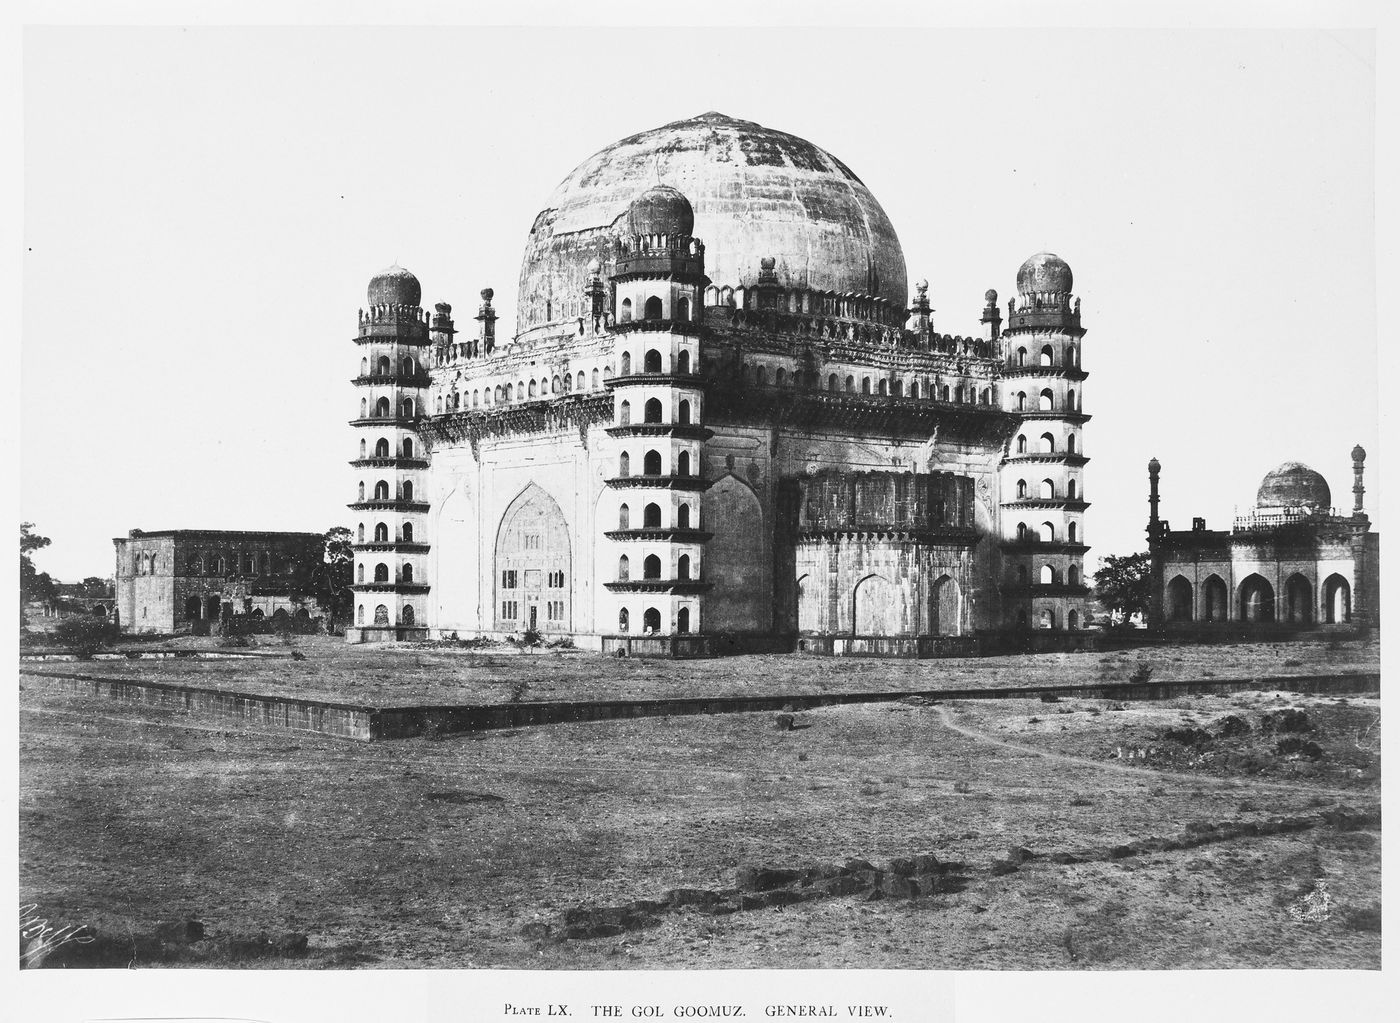 View of the Gol Gumbad showing the gatehouse on the left and the mosque on the right, Beejapore (now Bijapur), India